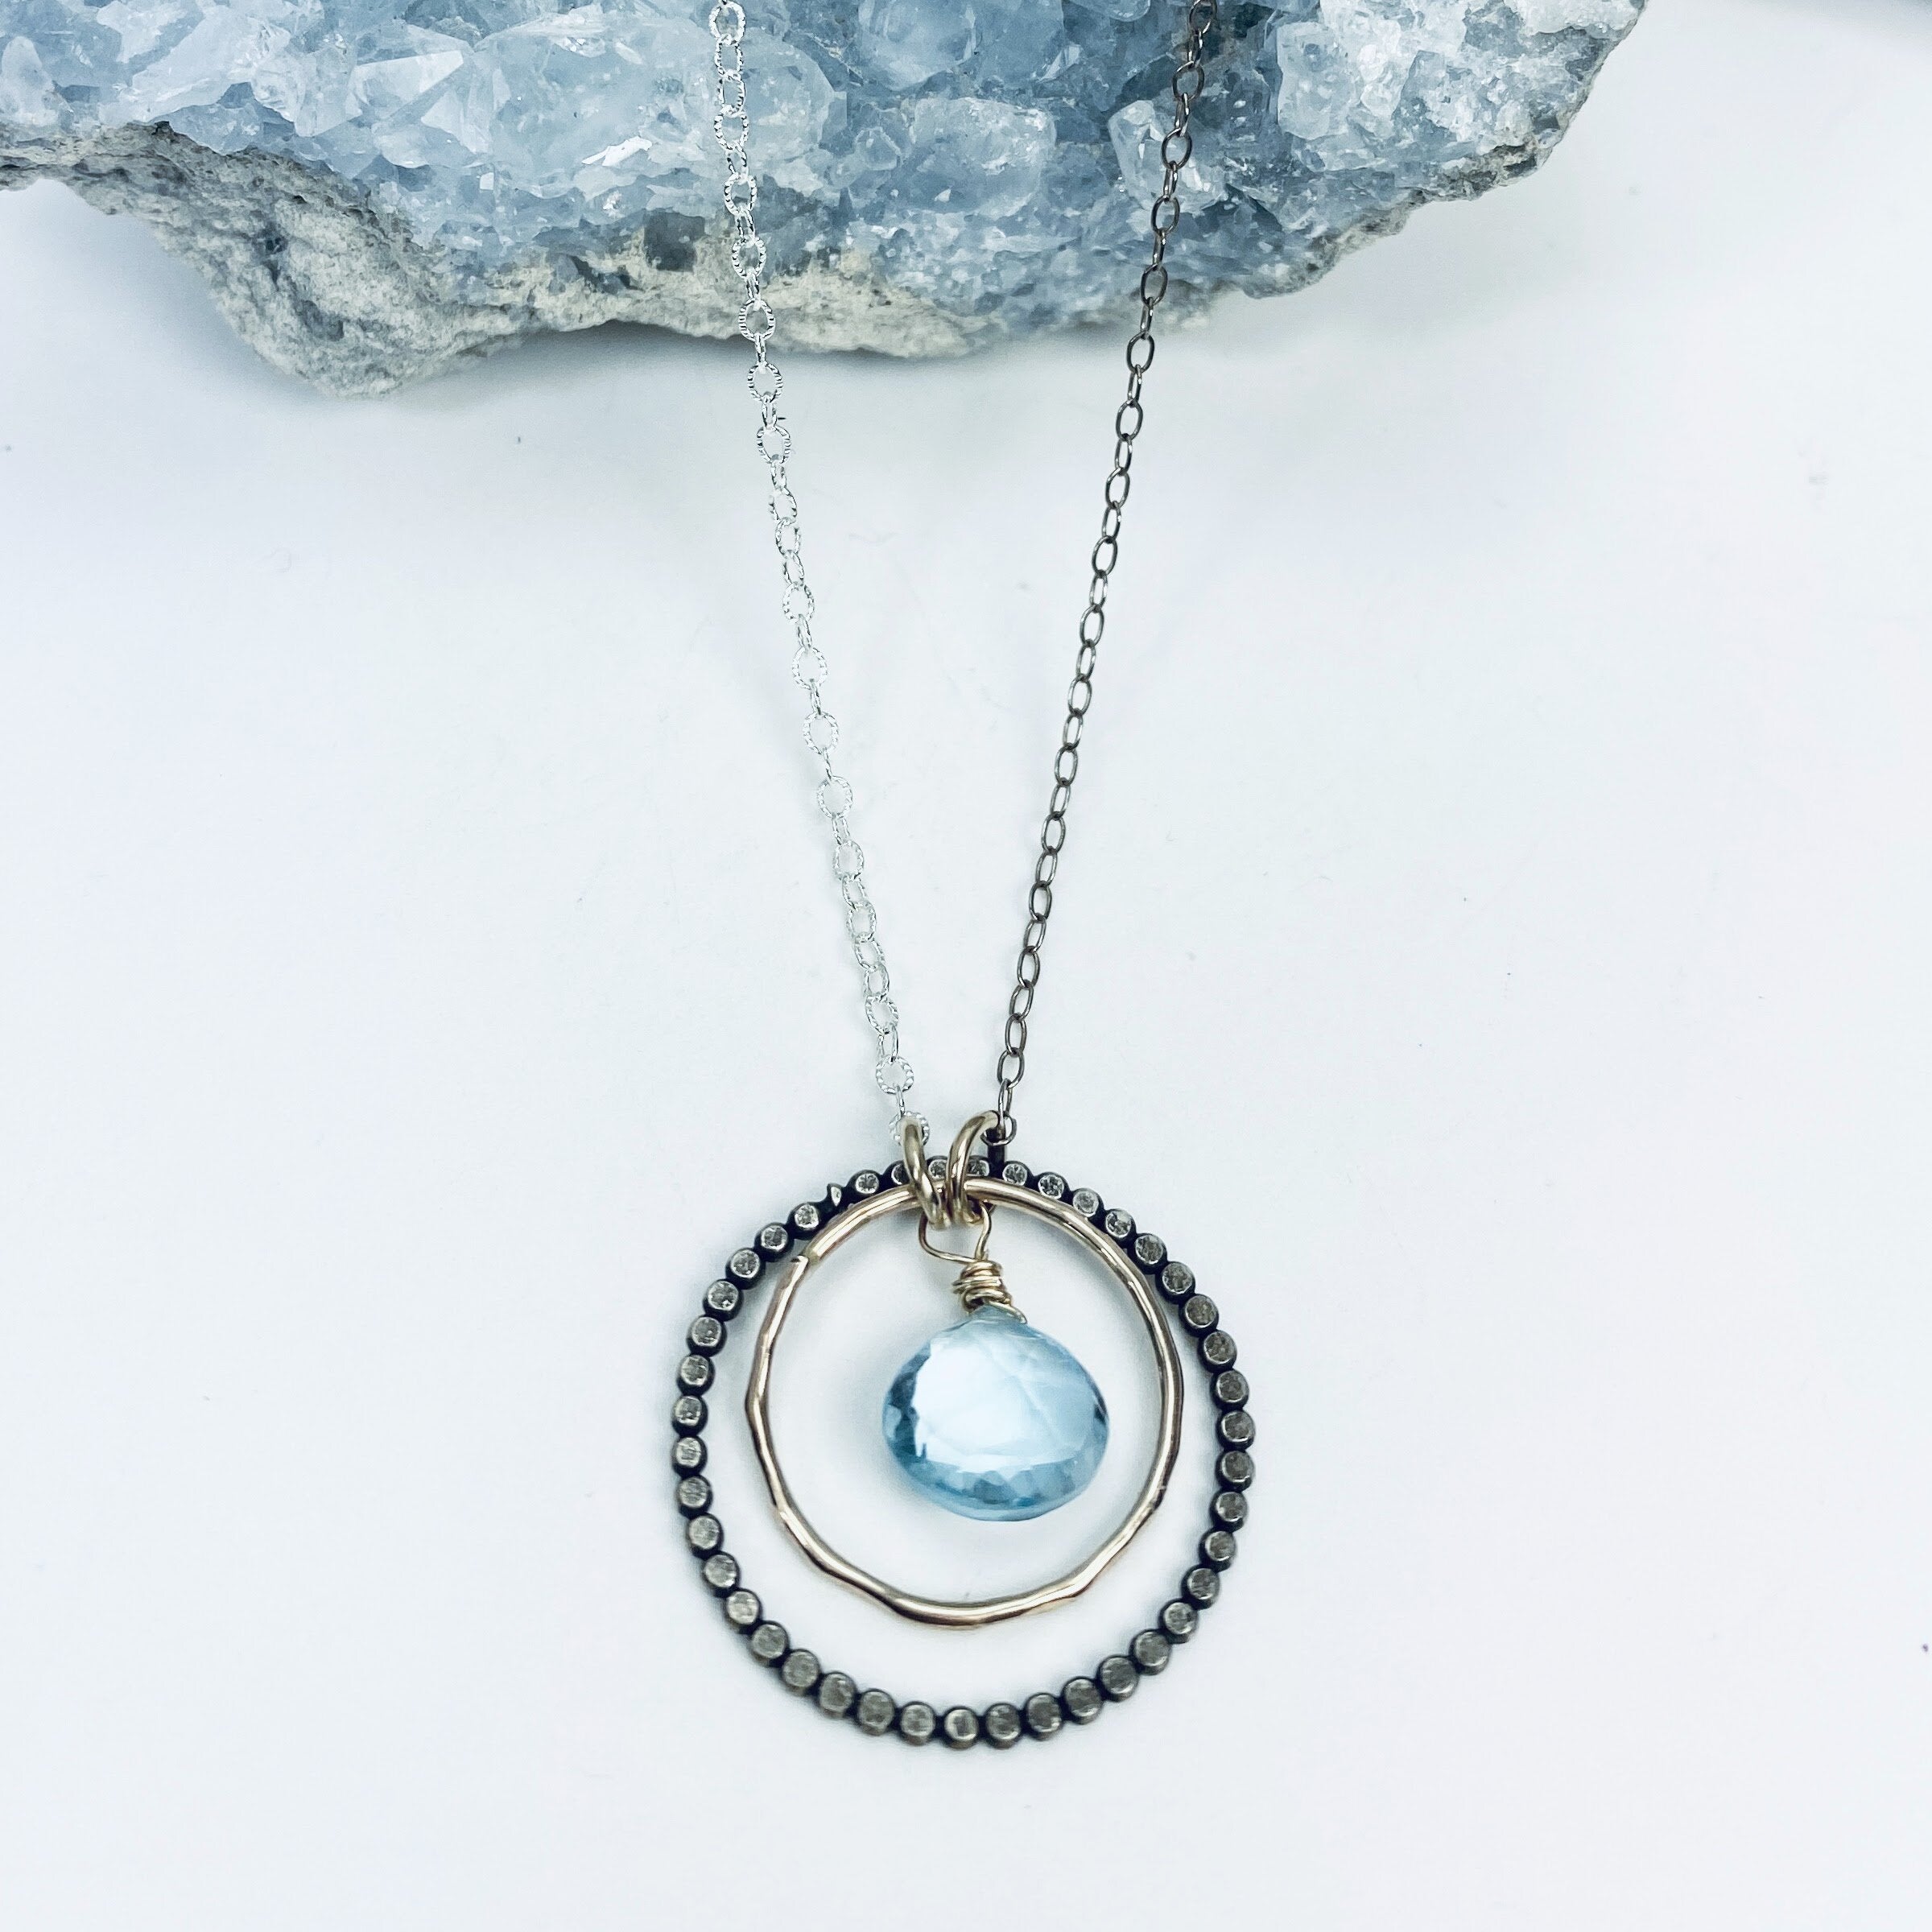 Whirlpool Necklace